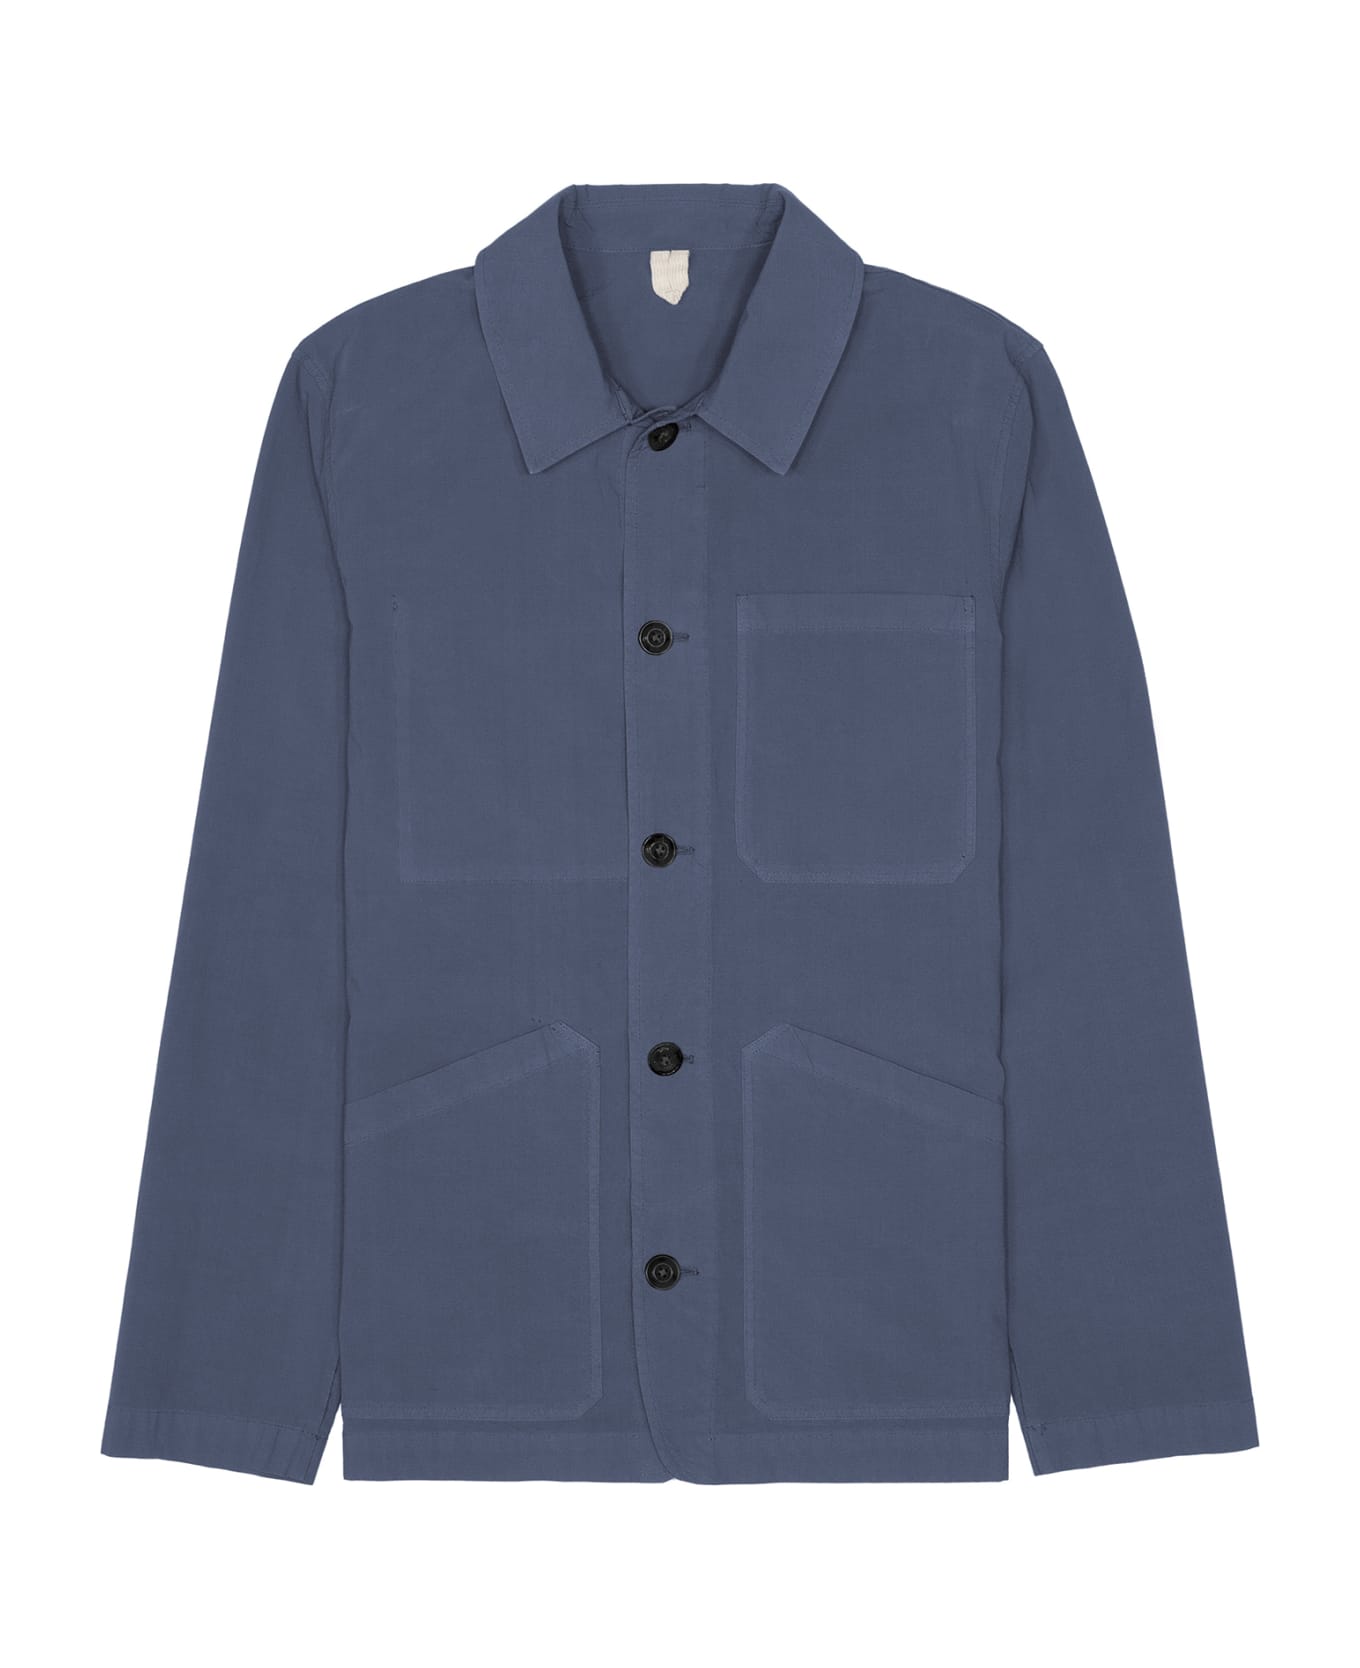 Altea Air Force Blue Cotton Jacket With Buttons - AVIO